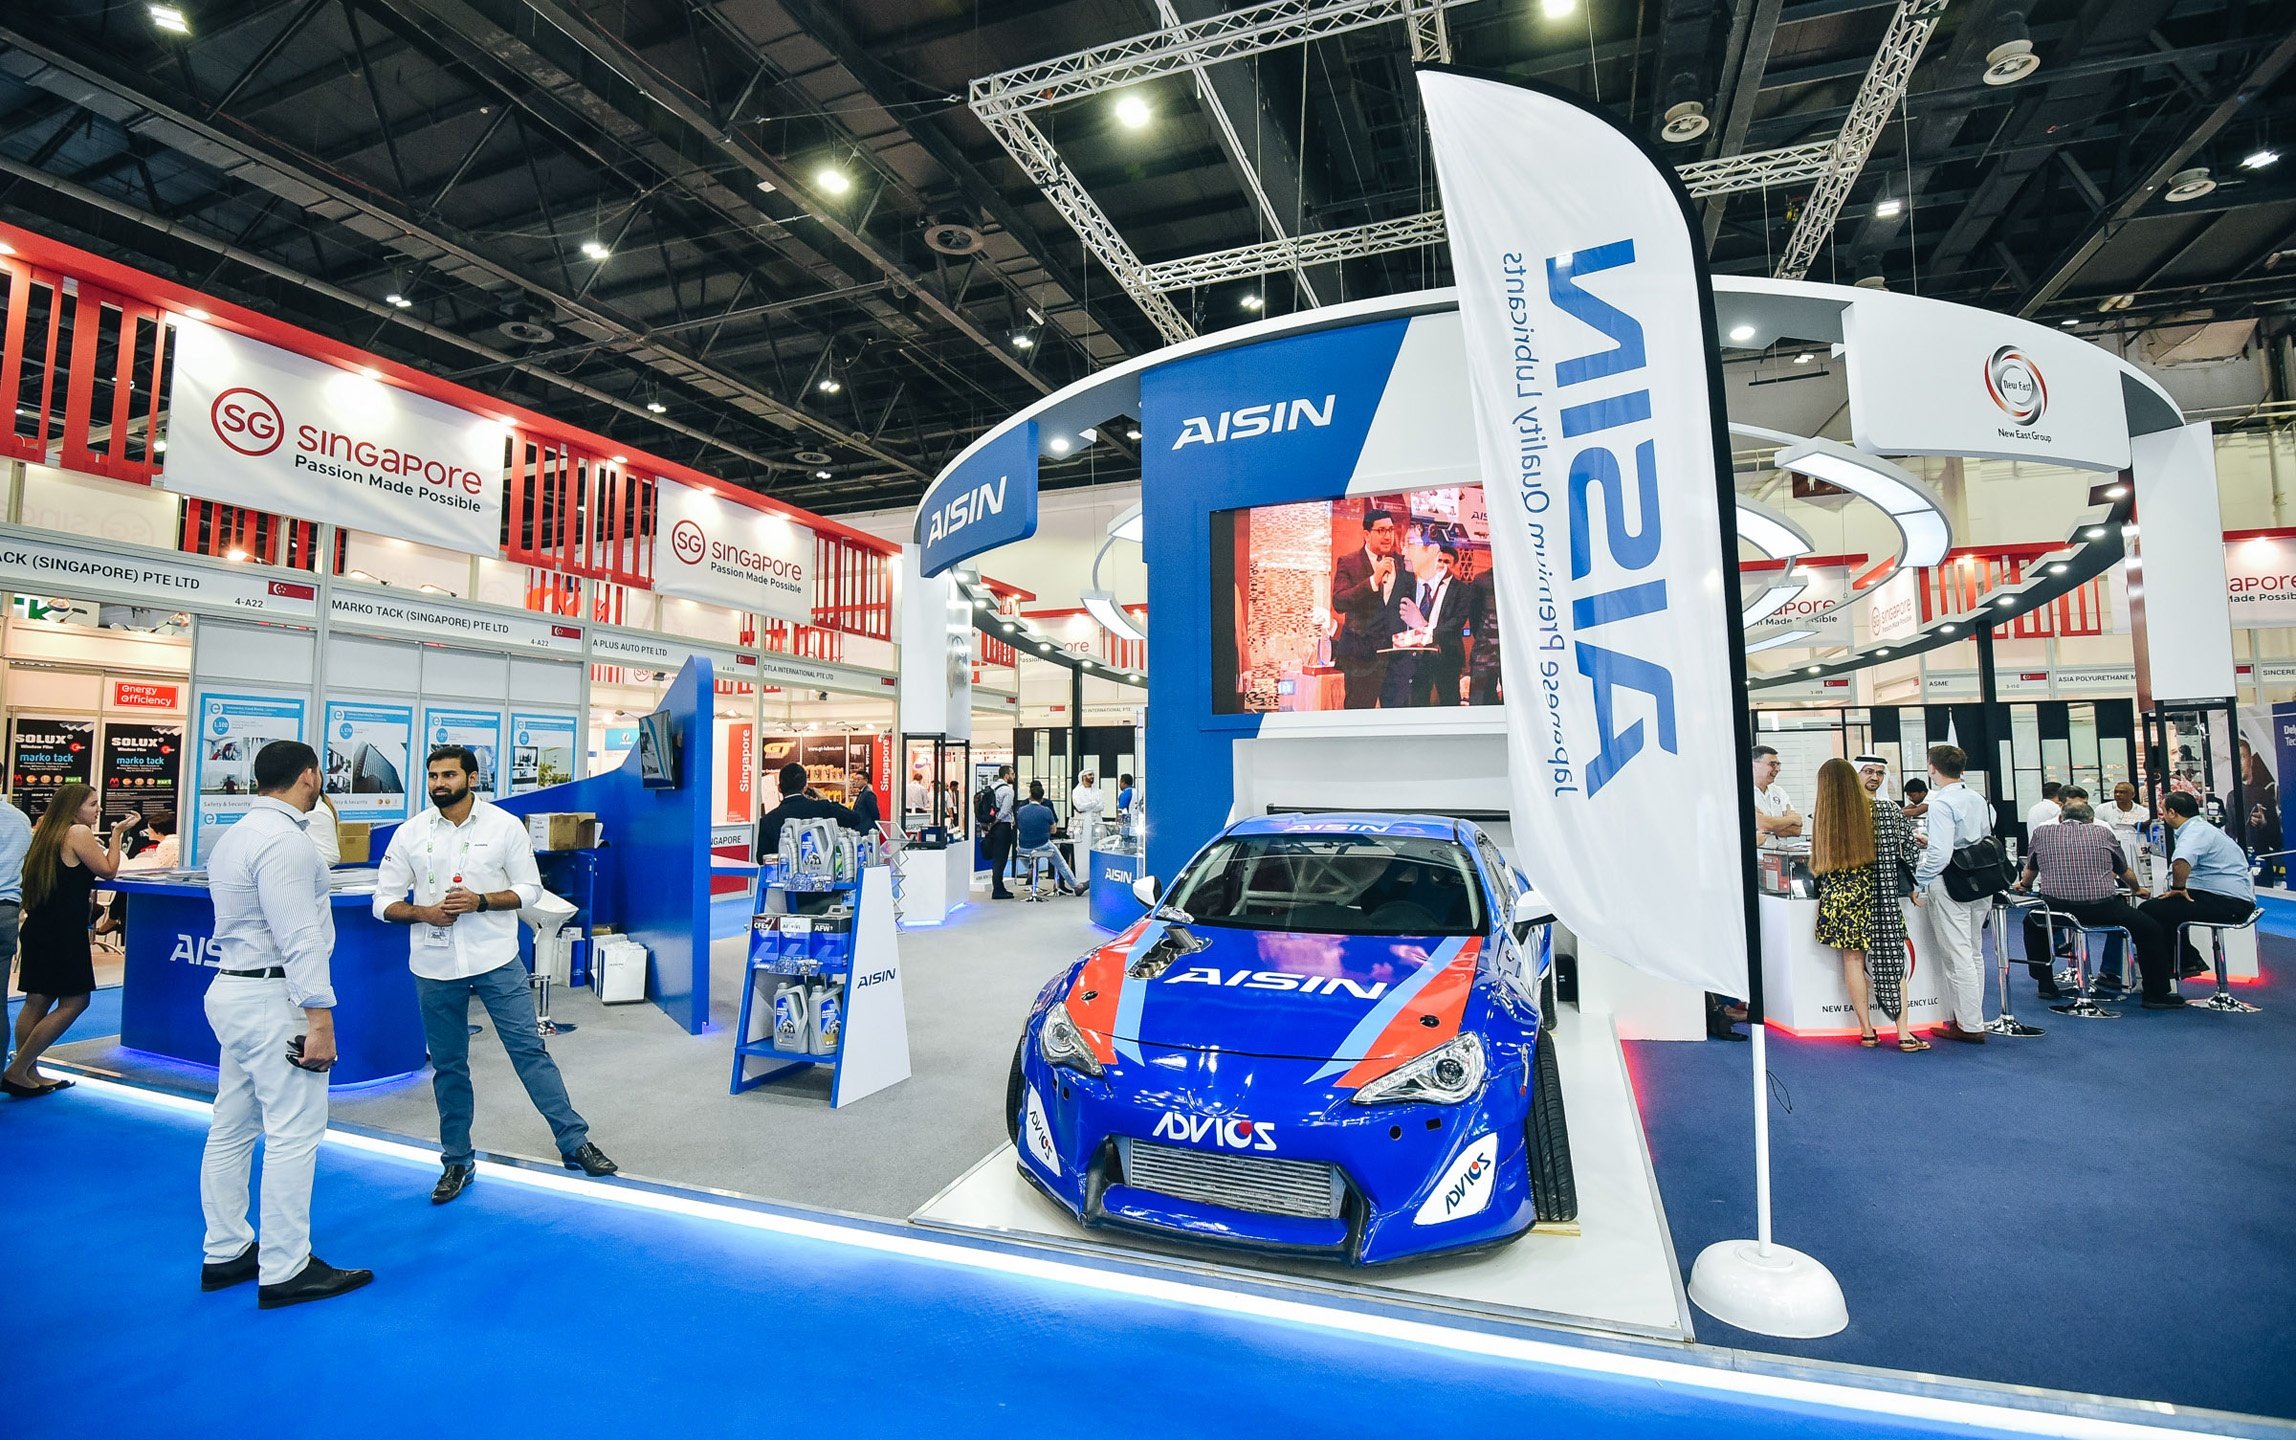 Dubai Postpones Automechanika from June 7 to October 19 2020. The event will have several exciting elements for thousands of trade buyers and industry professionals